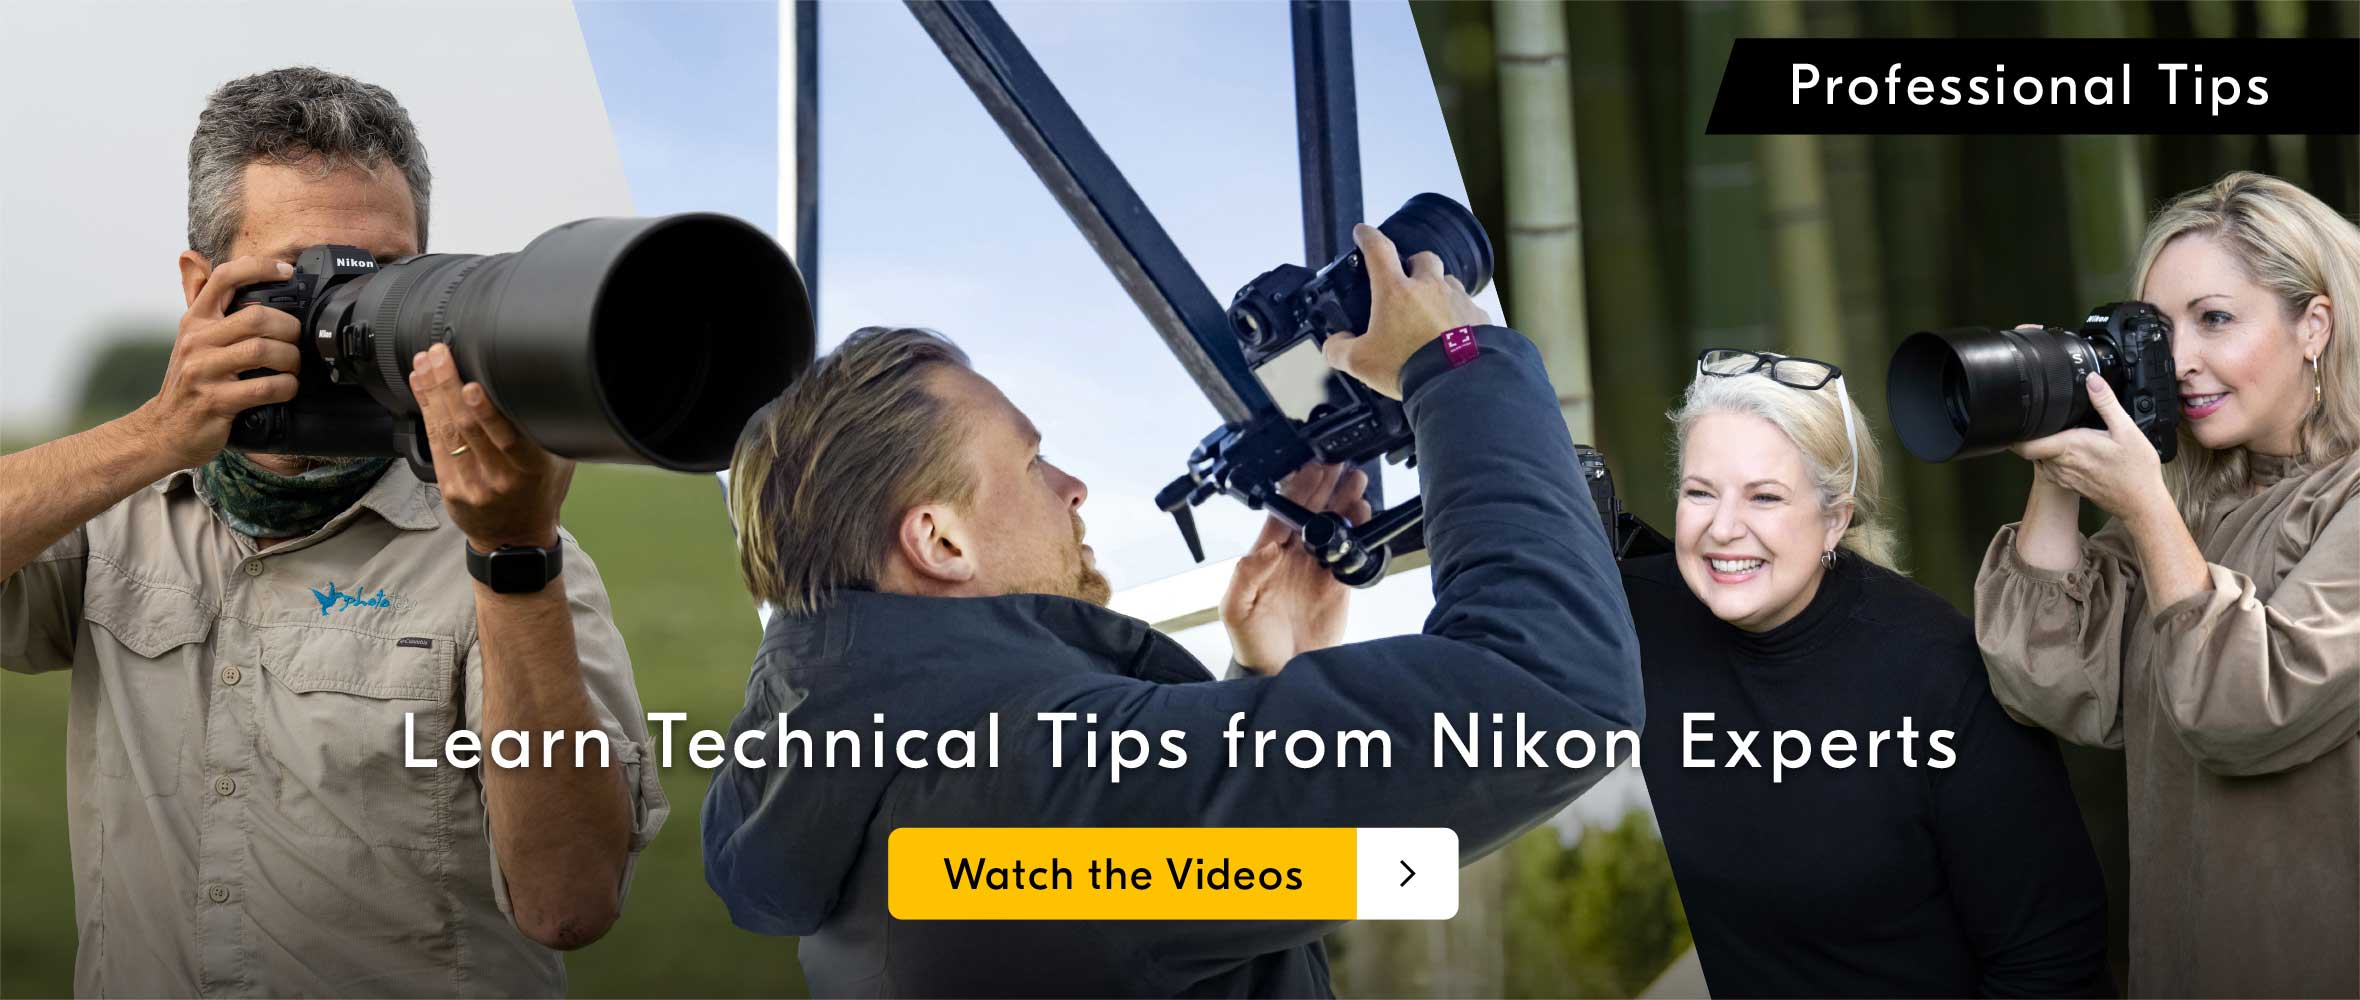 Professional Tips Learn Technical Tips from Nikon Experts Watch the Videos